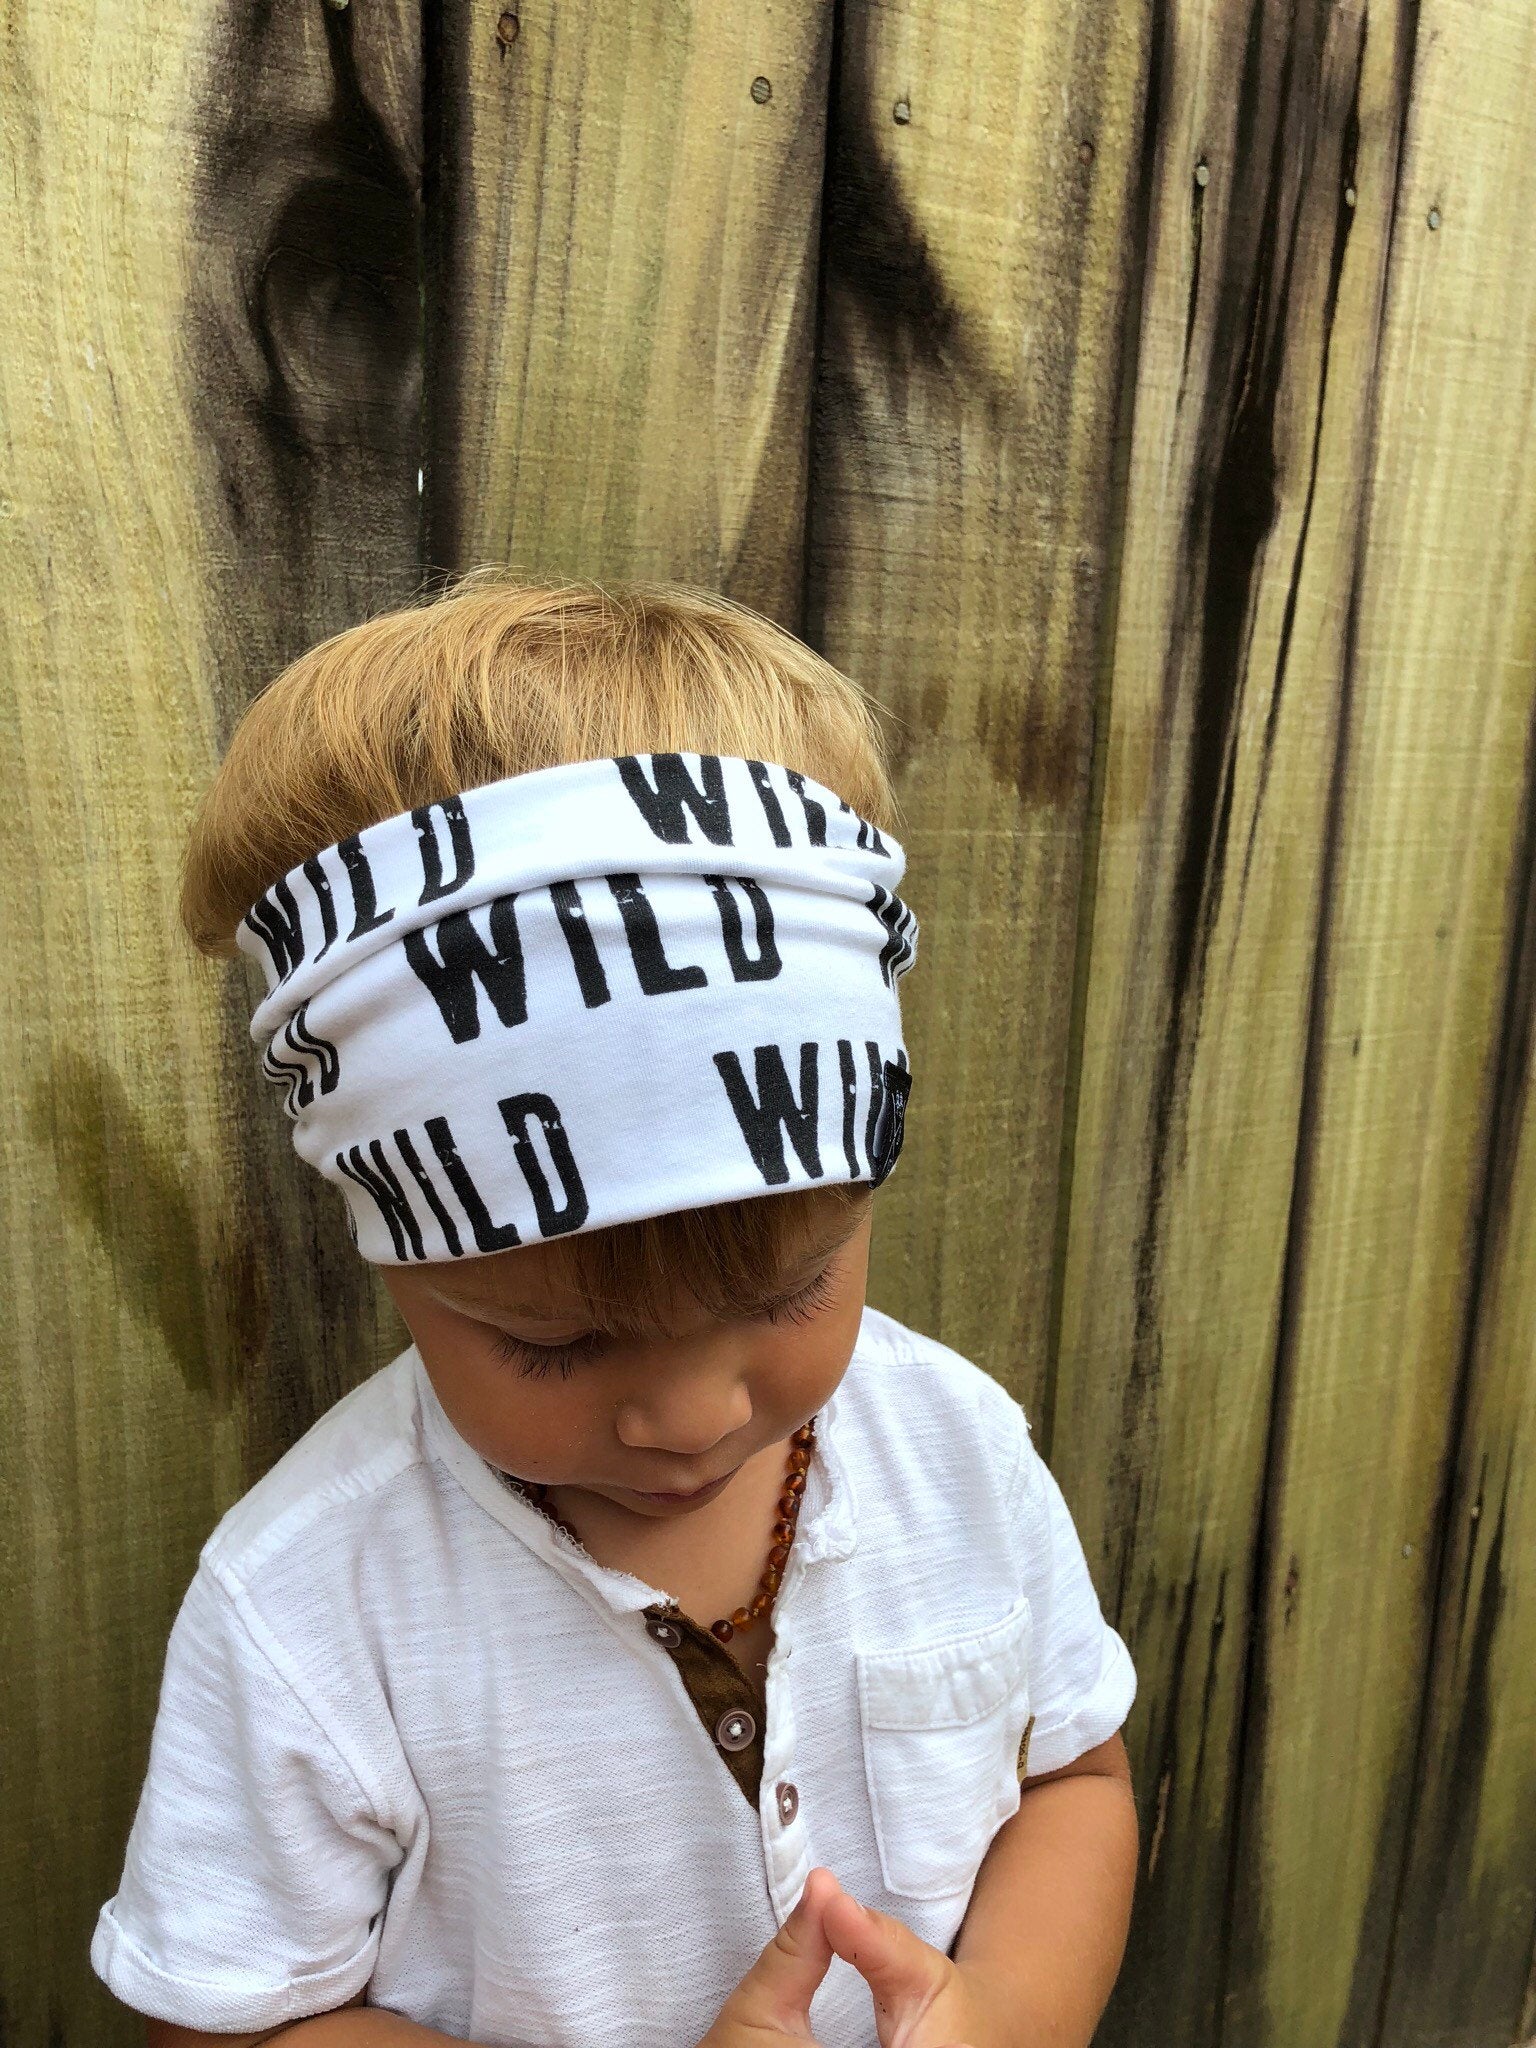 Wild boys headband, unisex headband great for long haired boys/toddlers or to keep hearing aids in place!